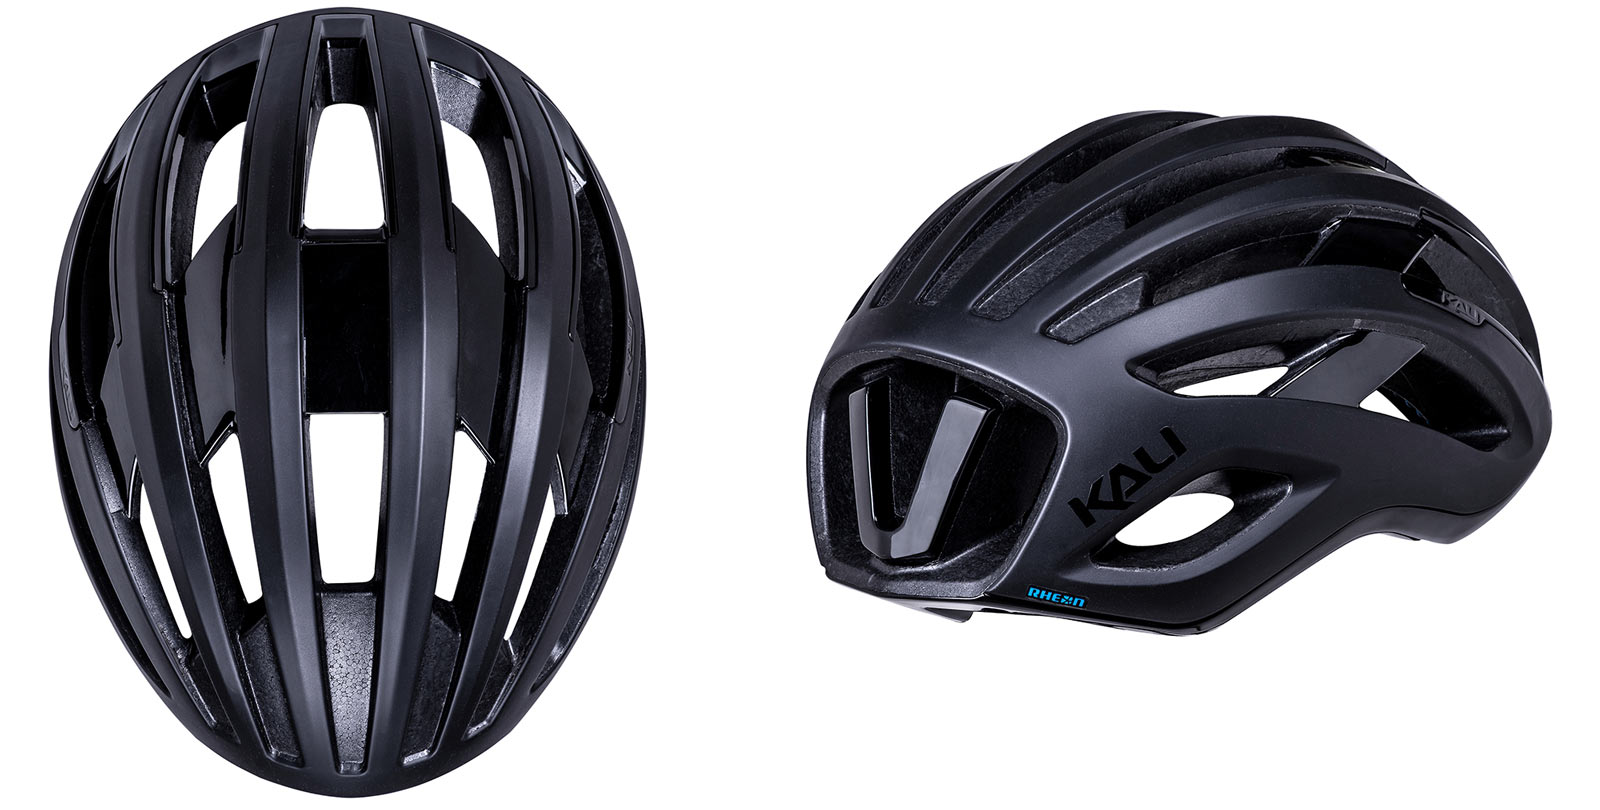 kali grit road and gravel bike helmet shown from rear and top